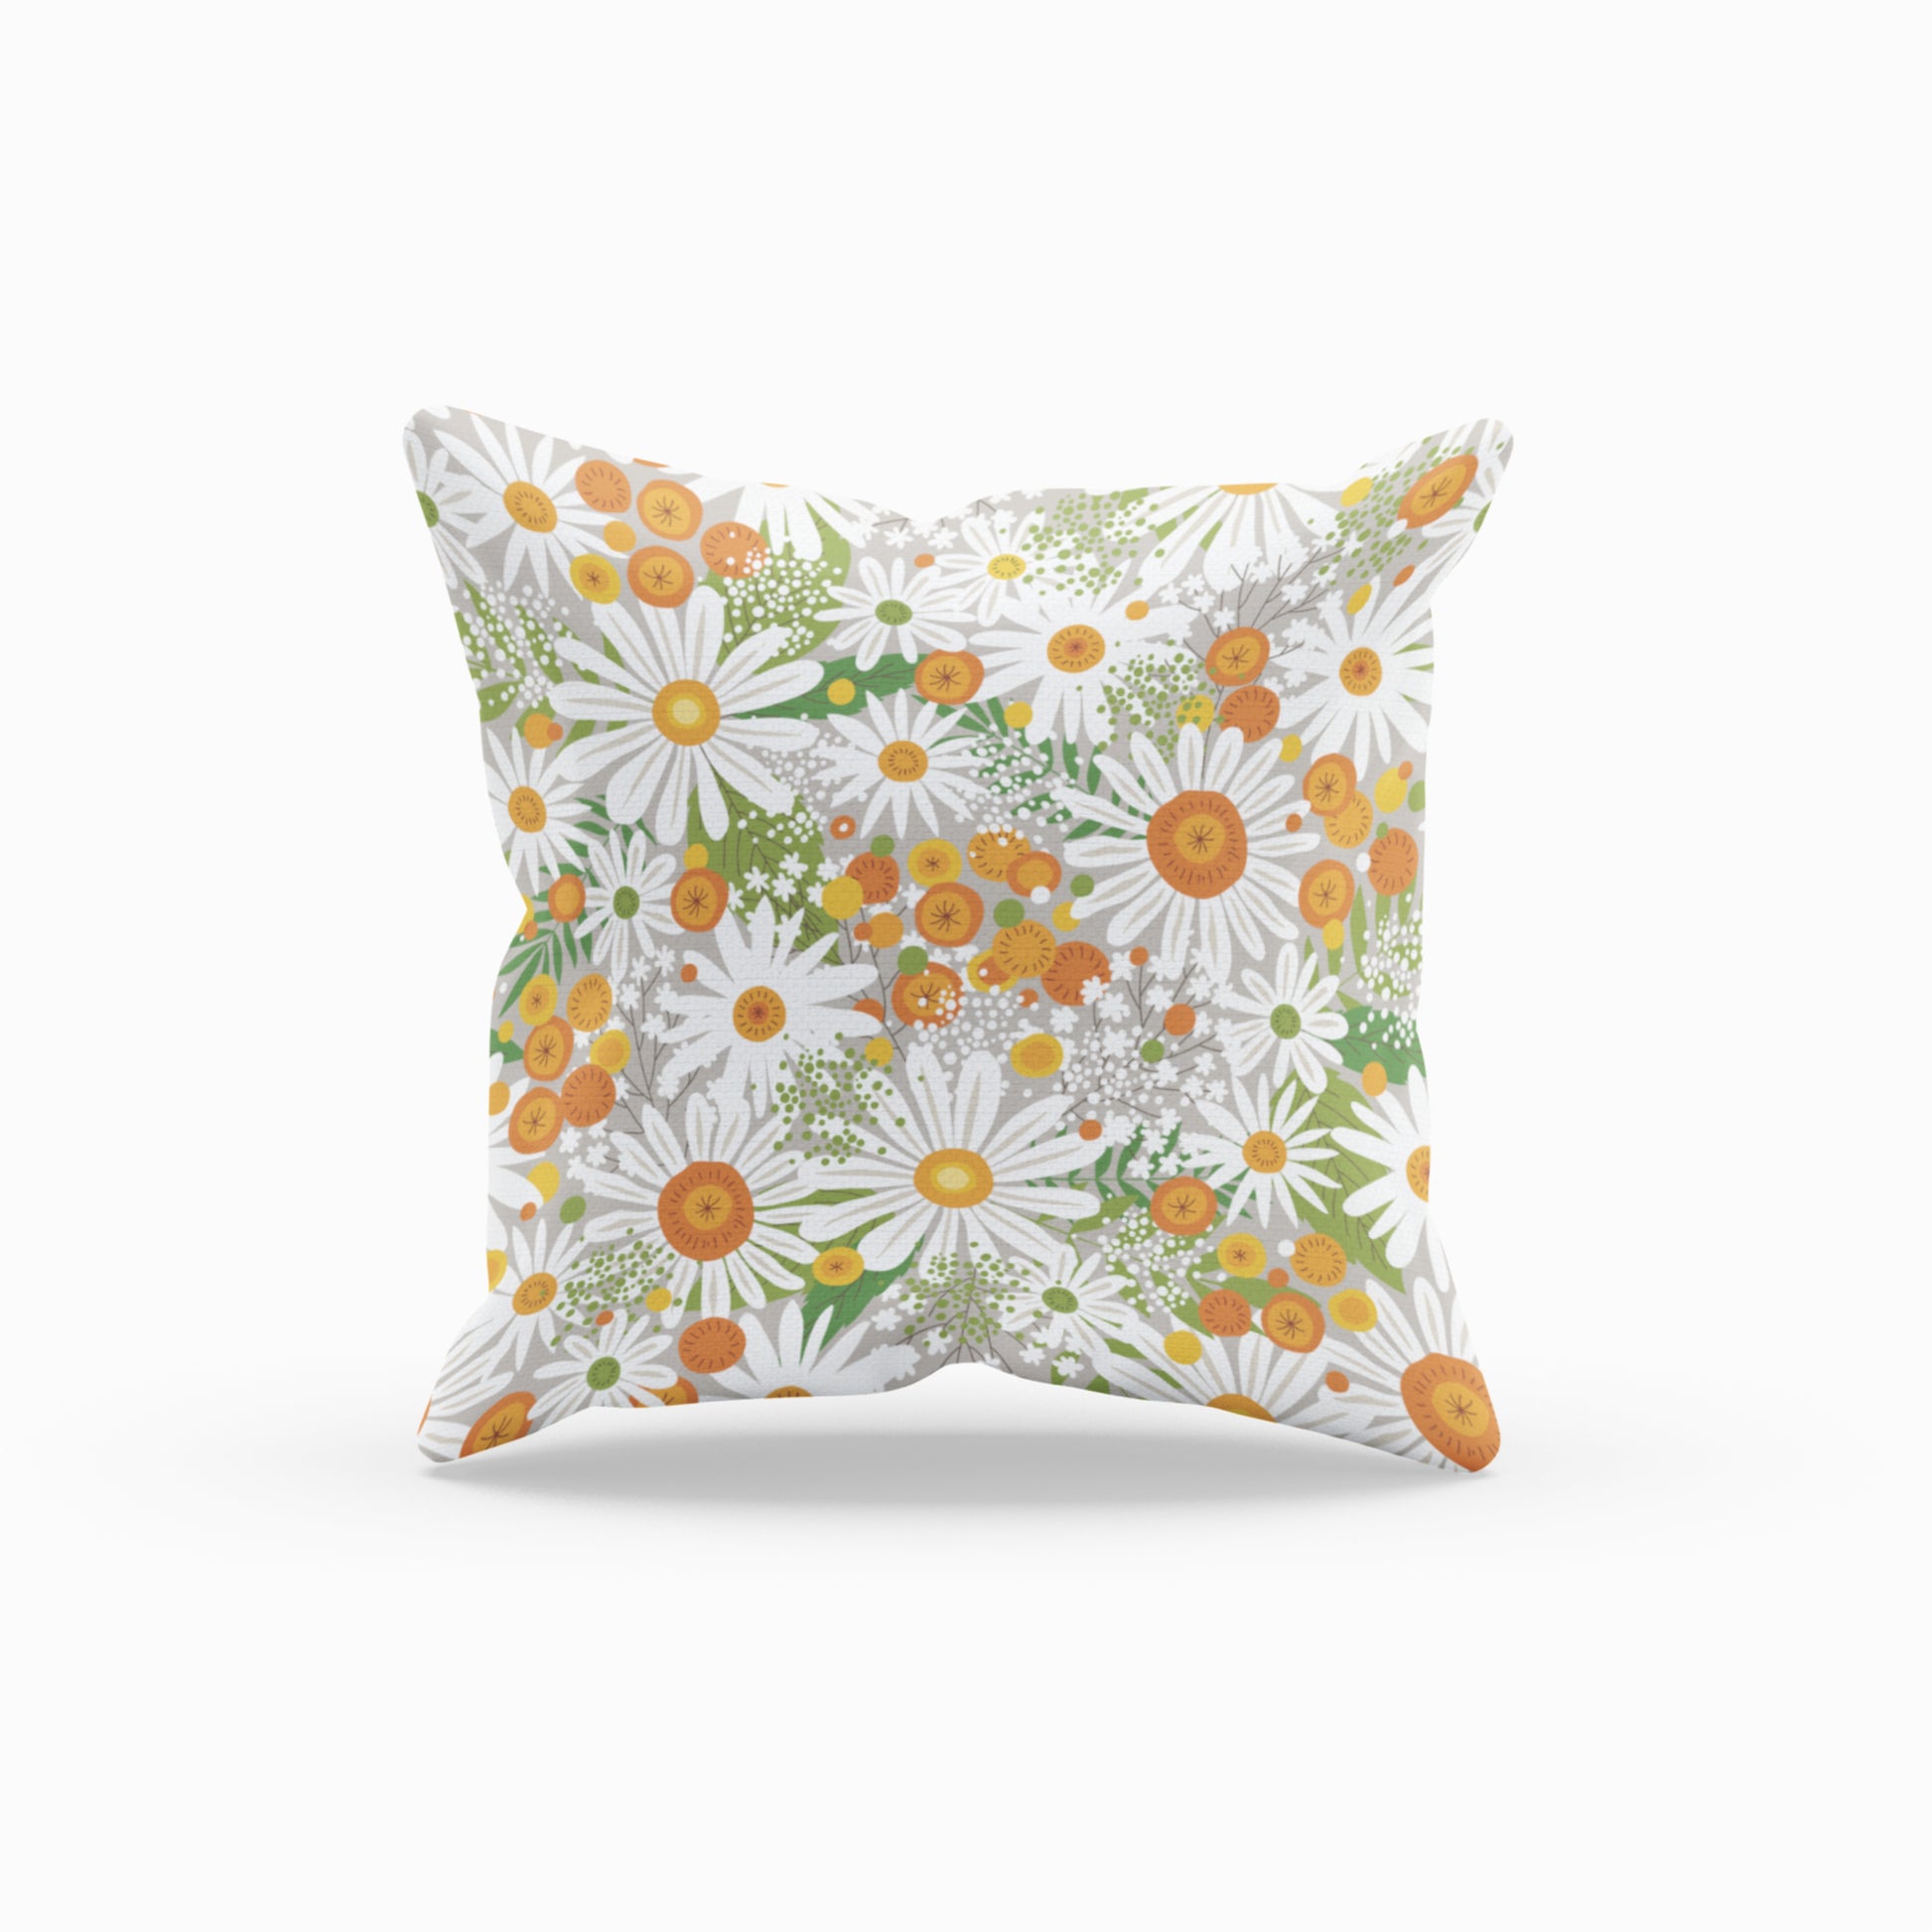 Stylish Printed Throw Pillow with Daisy Design